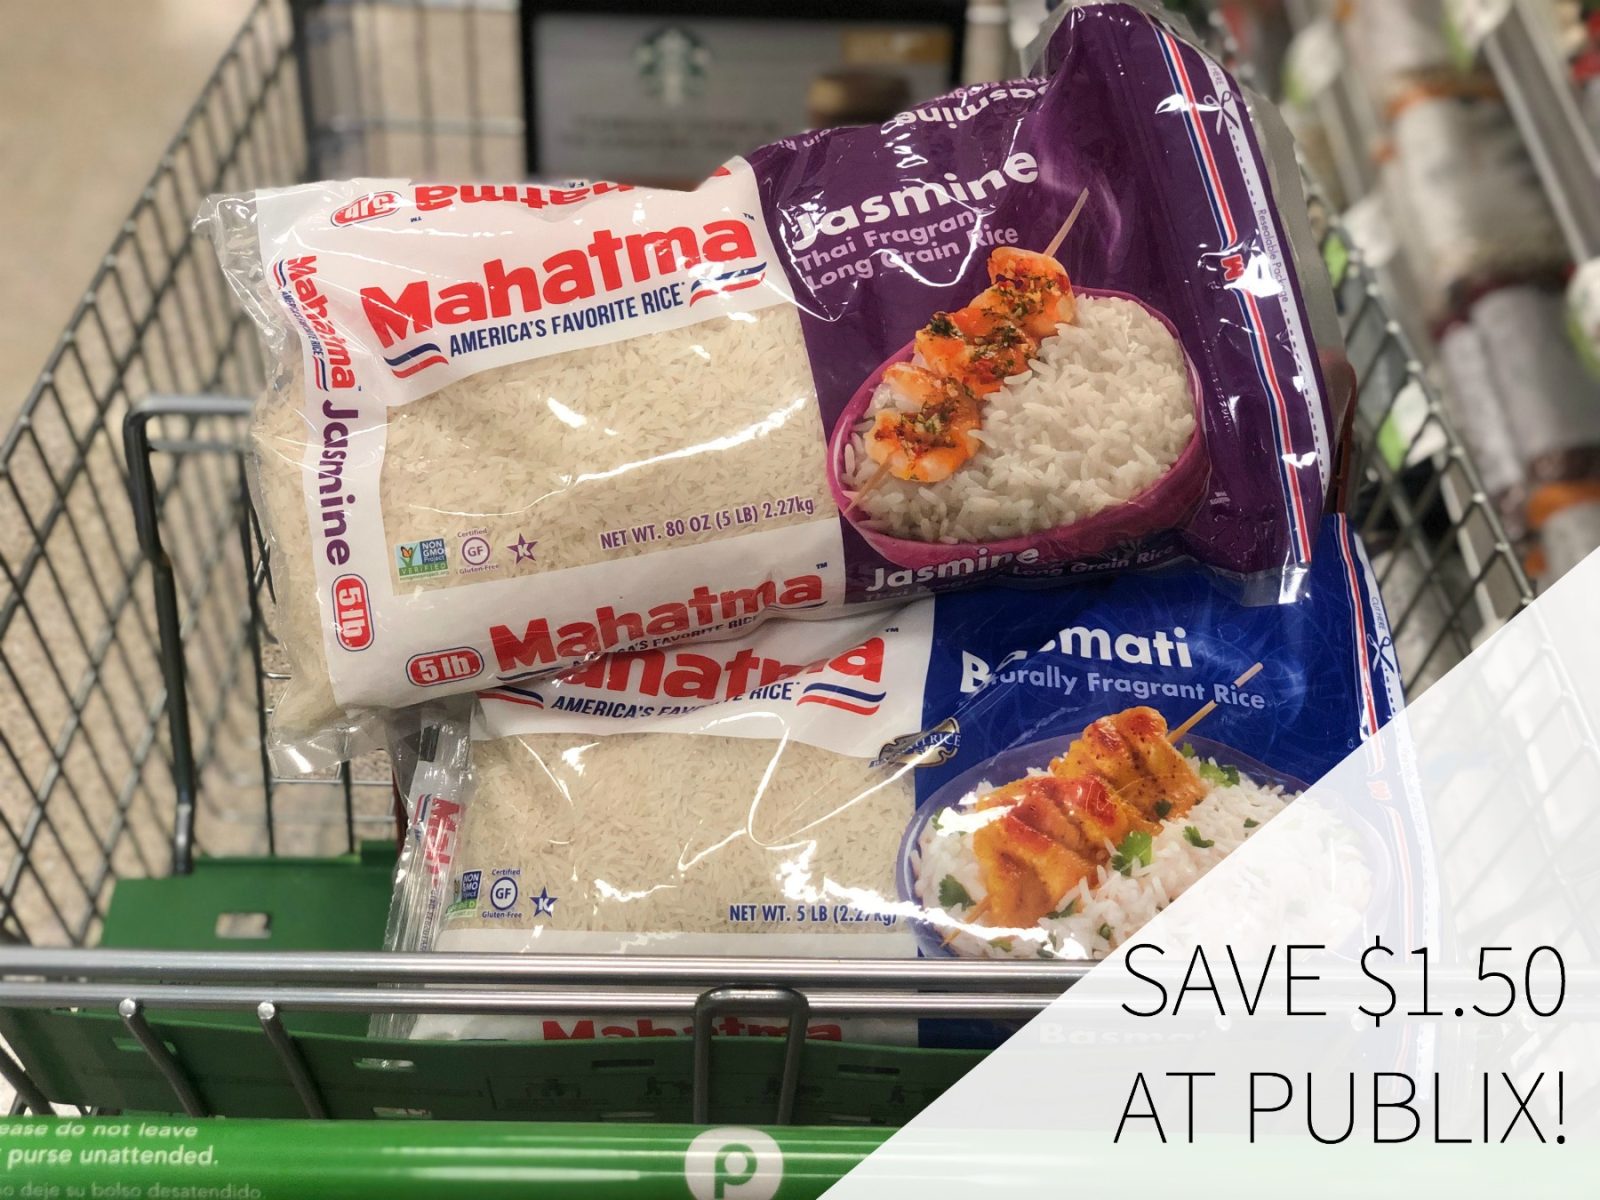 Save $1.50 On Mahatma Rice At Publix – Grab A Great Deal & Serve Up My Mexican Picadillo Recipe!